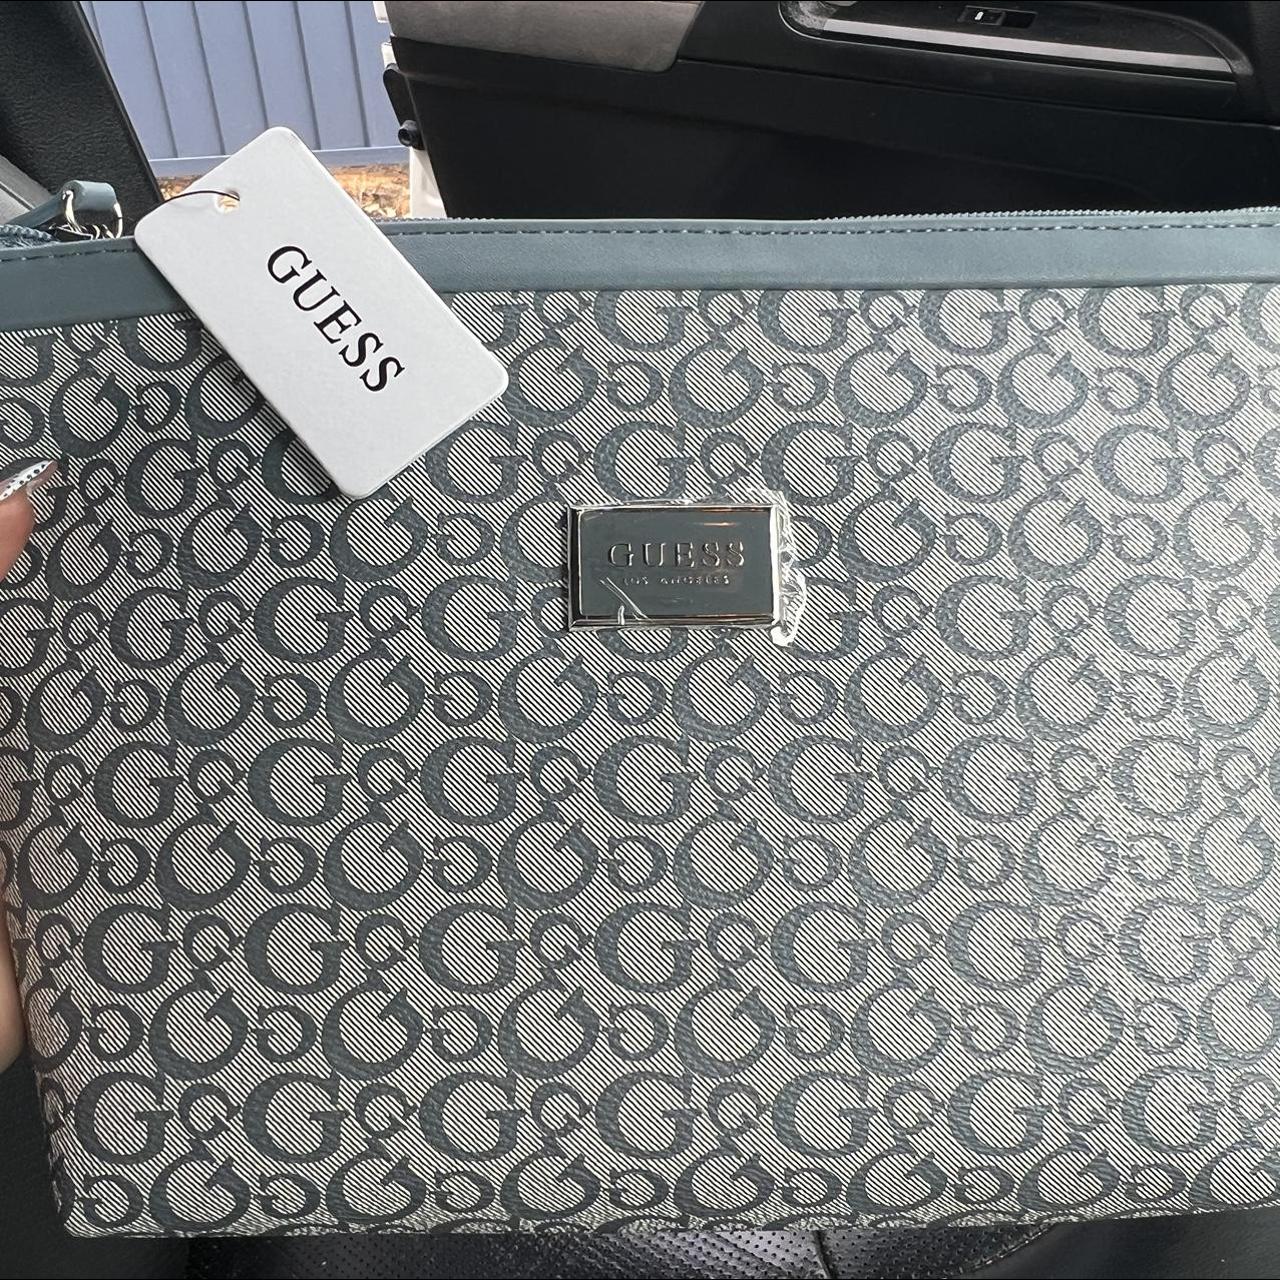 Guess makeup bag Brand new with tag - Depop